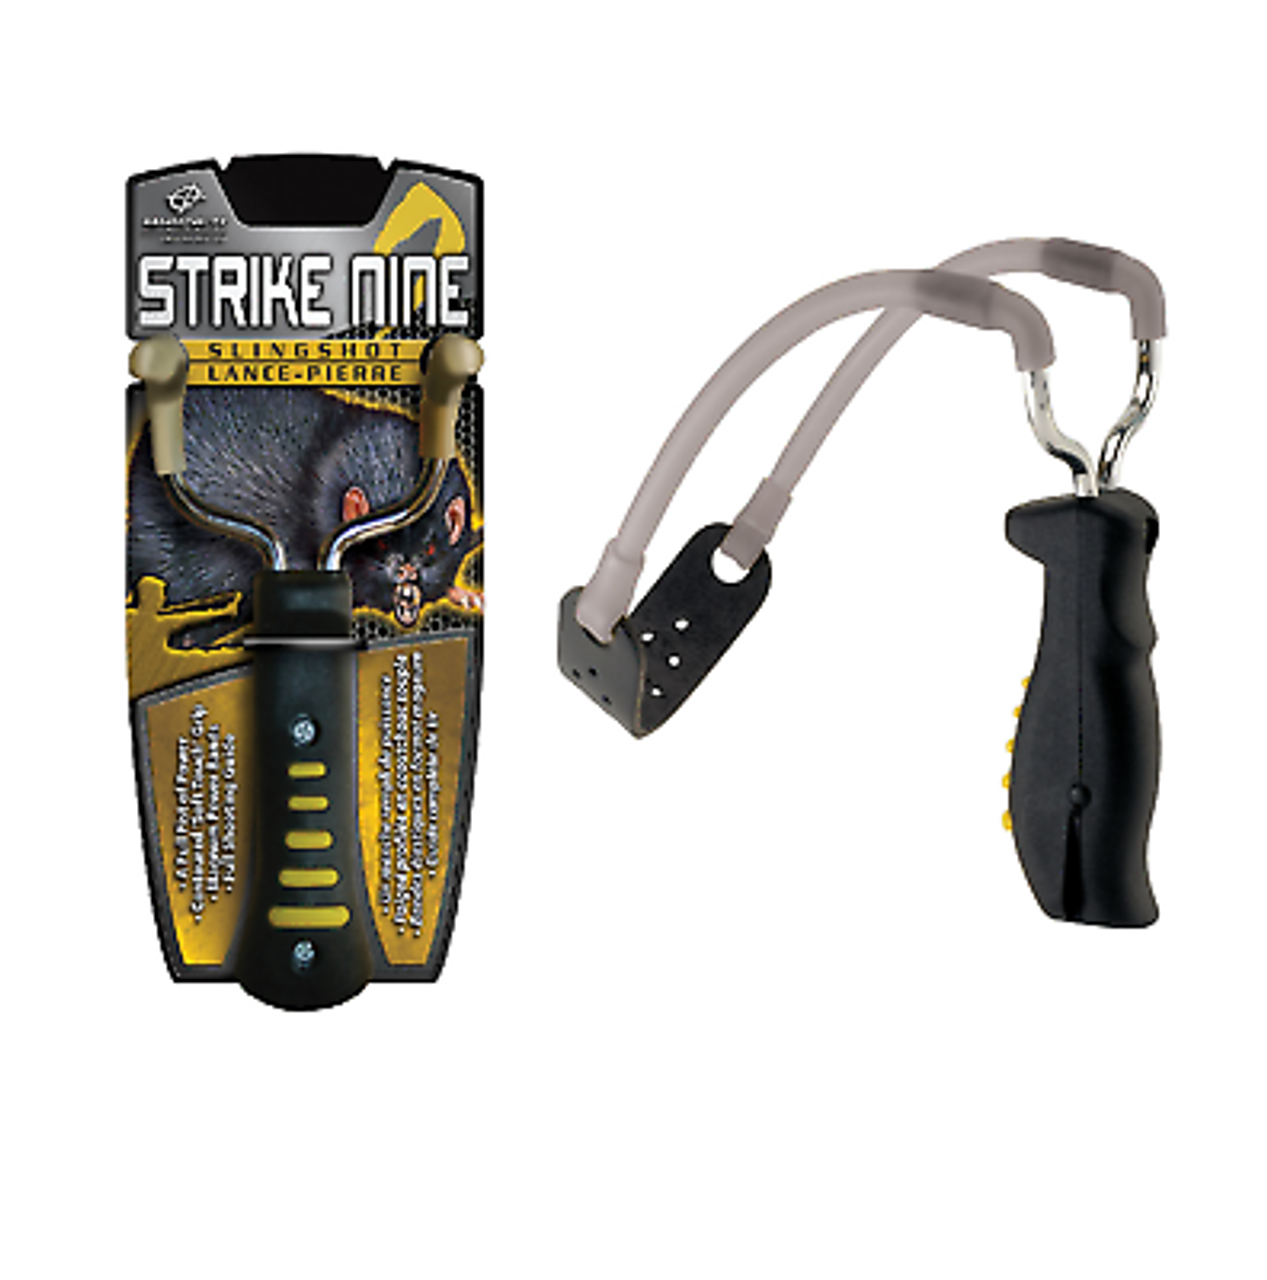 It's the ideal intruduction to the sport. The strike nine offers durable slingshot construction with solid range and accuracy.
• Contoured 'soft touch' grip
• Standard bands